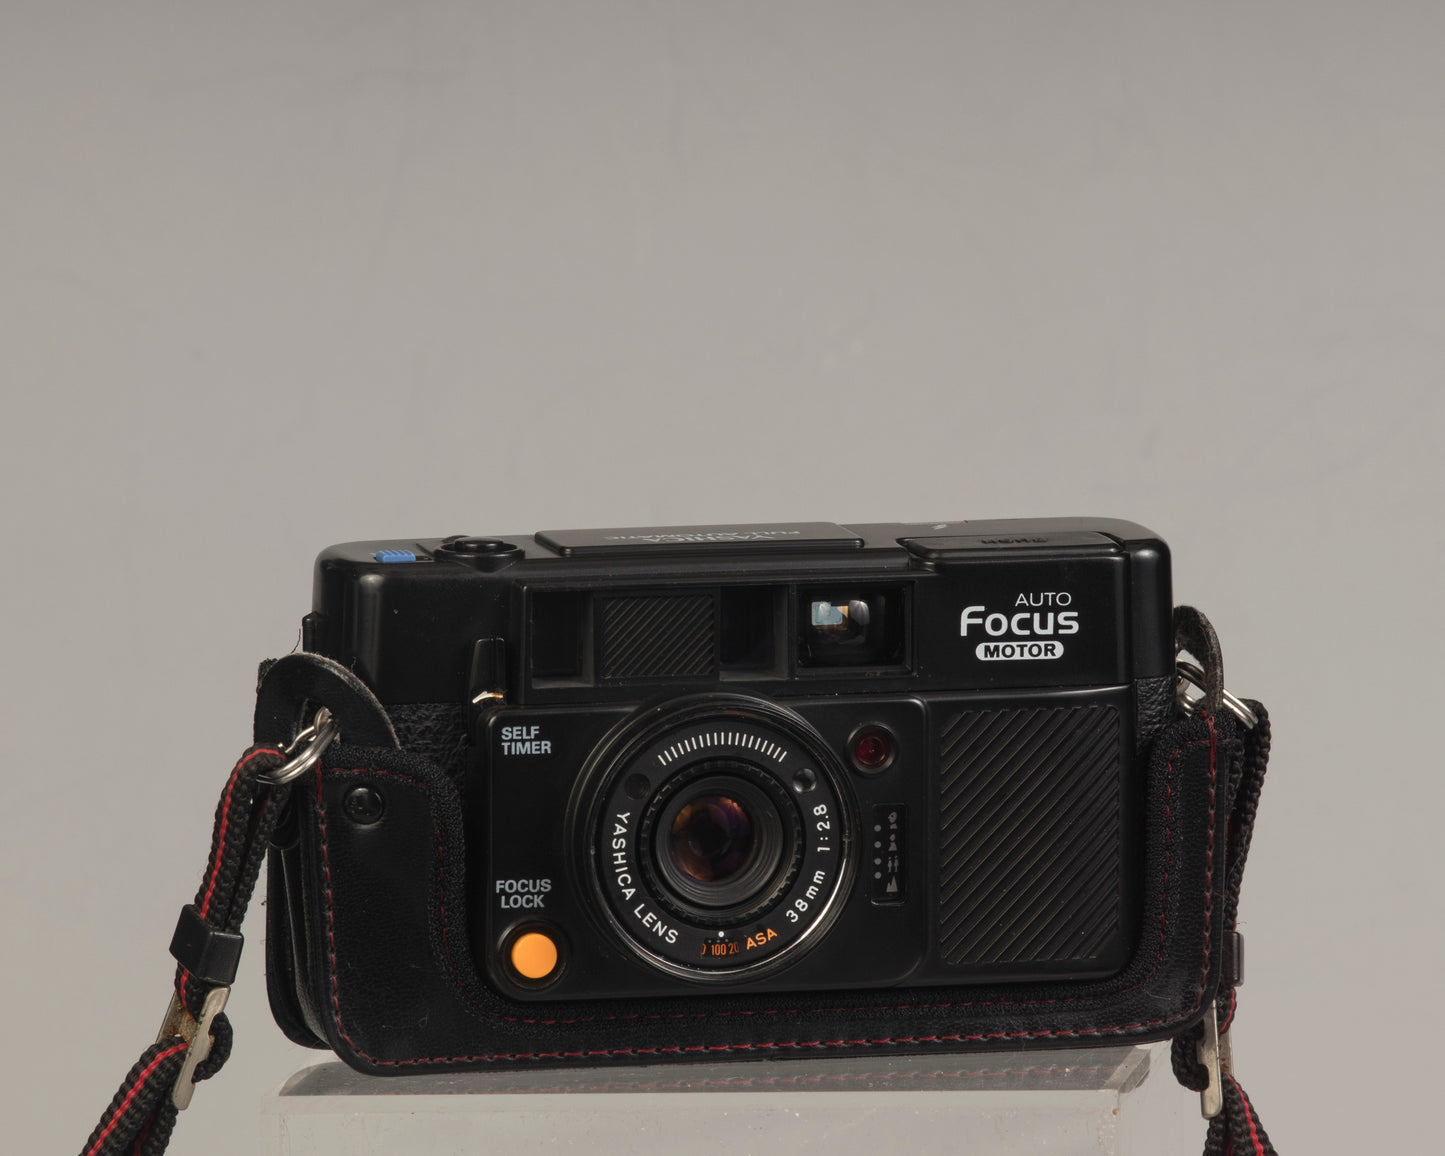 The Yashica Auto Focus Motor (shown in half-case) is a classic 35mm point-and-shoot film camera featuring a 38mm f2.8 lens